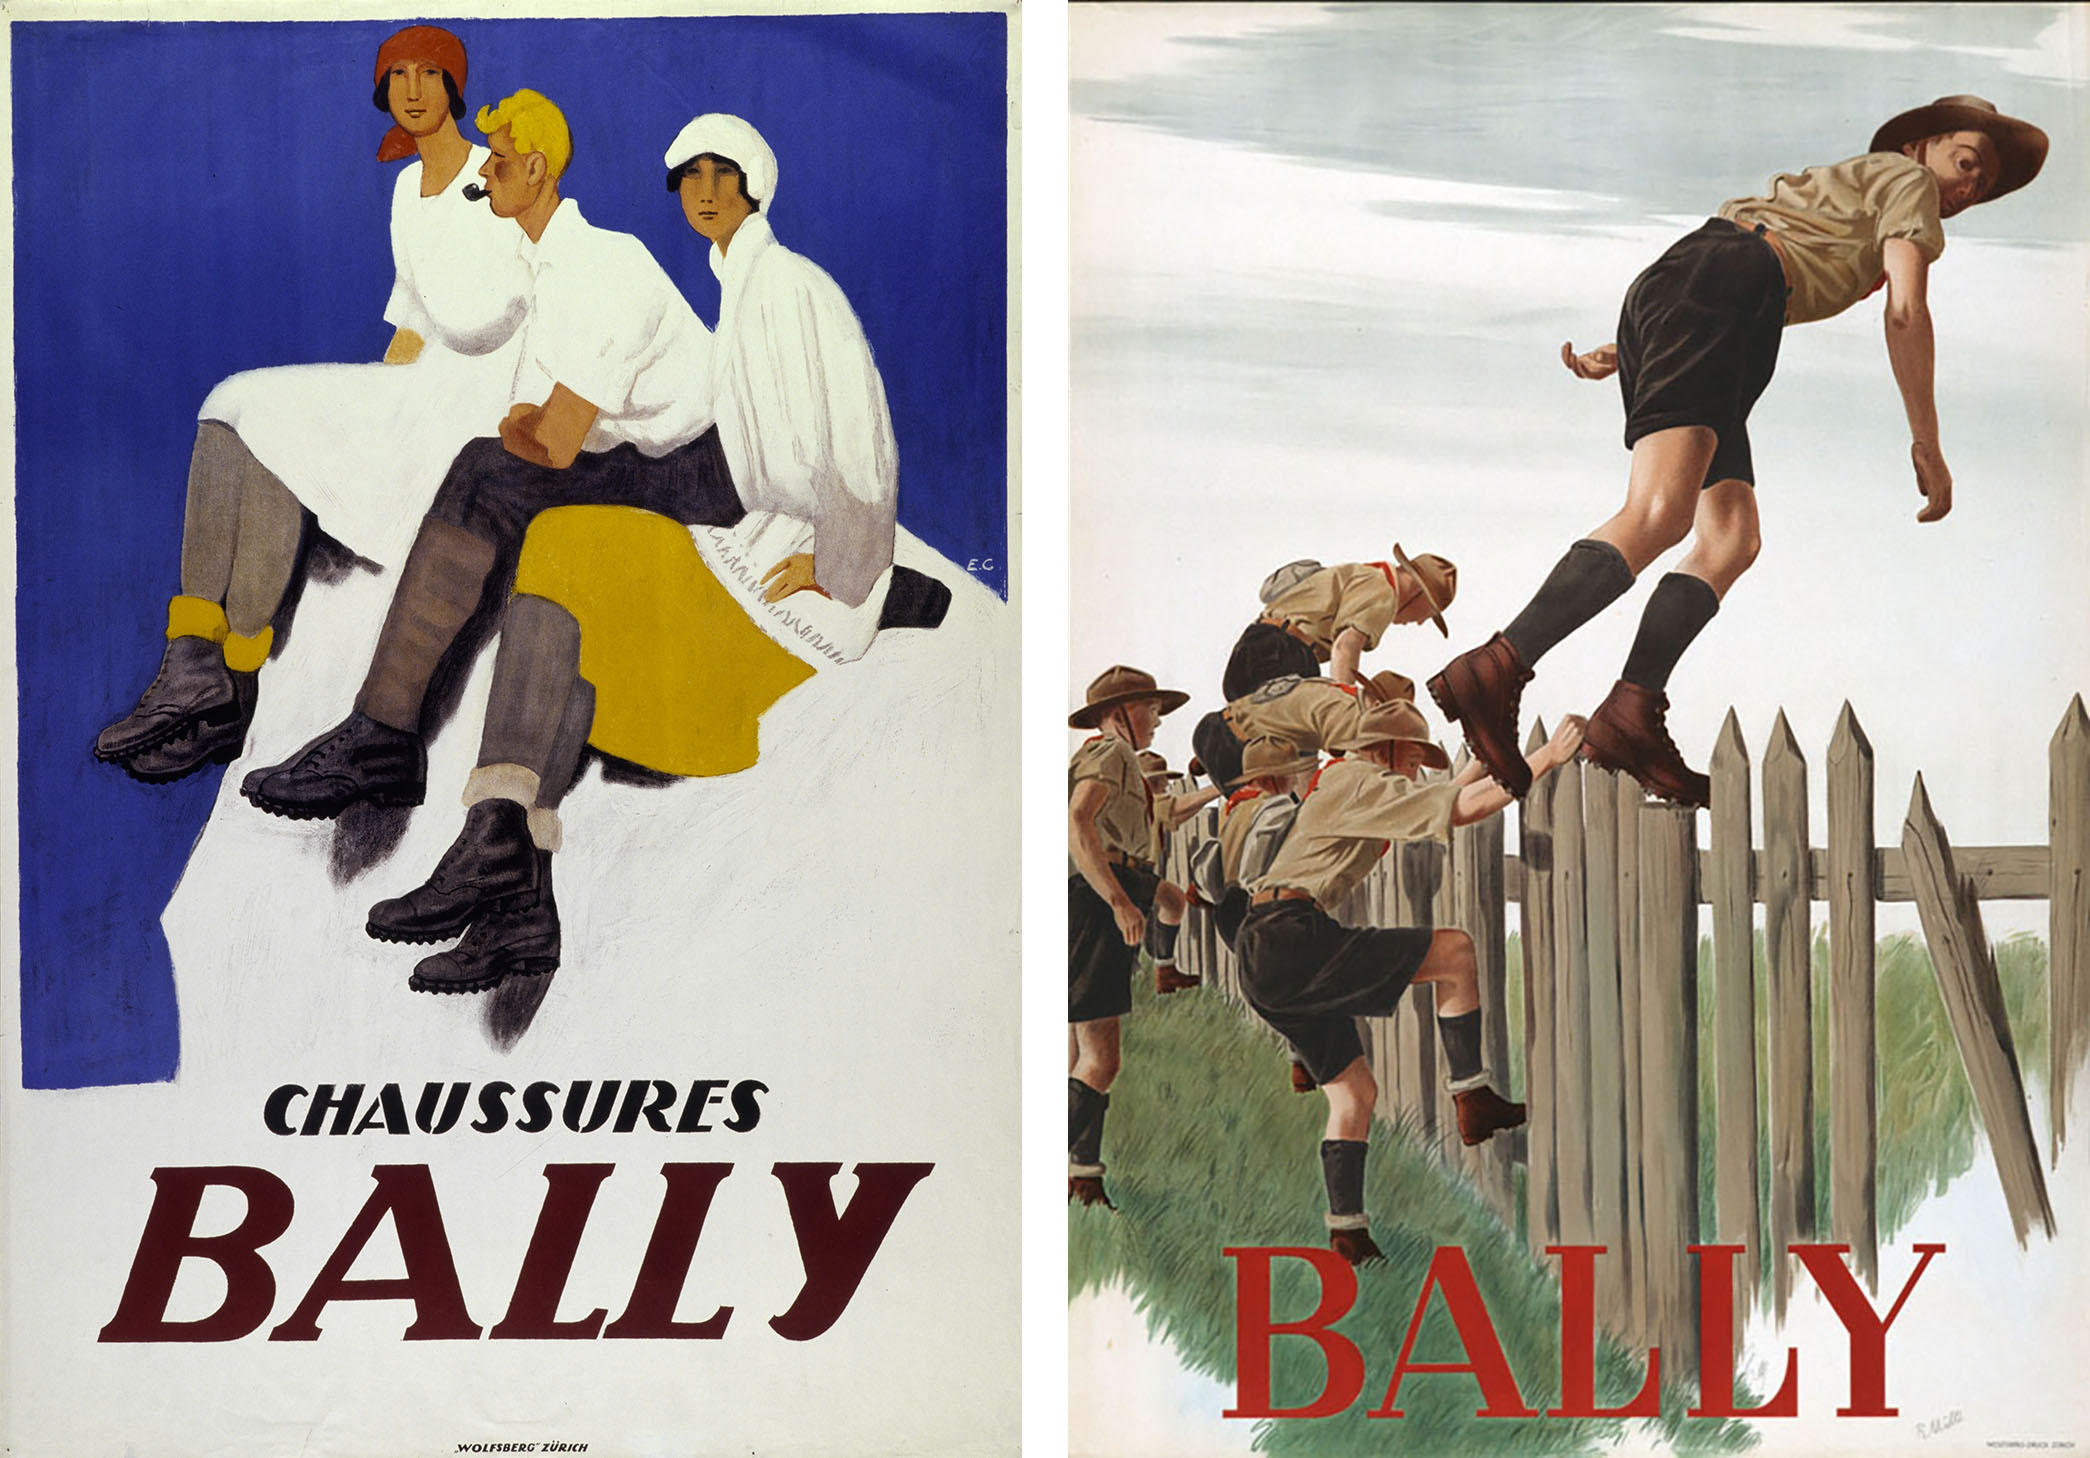 Bally posters (1924 and 1947)